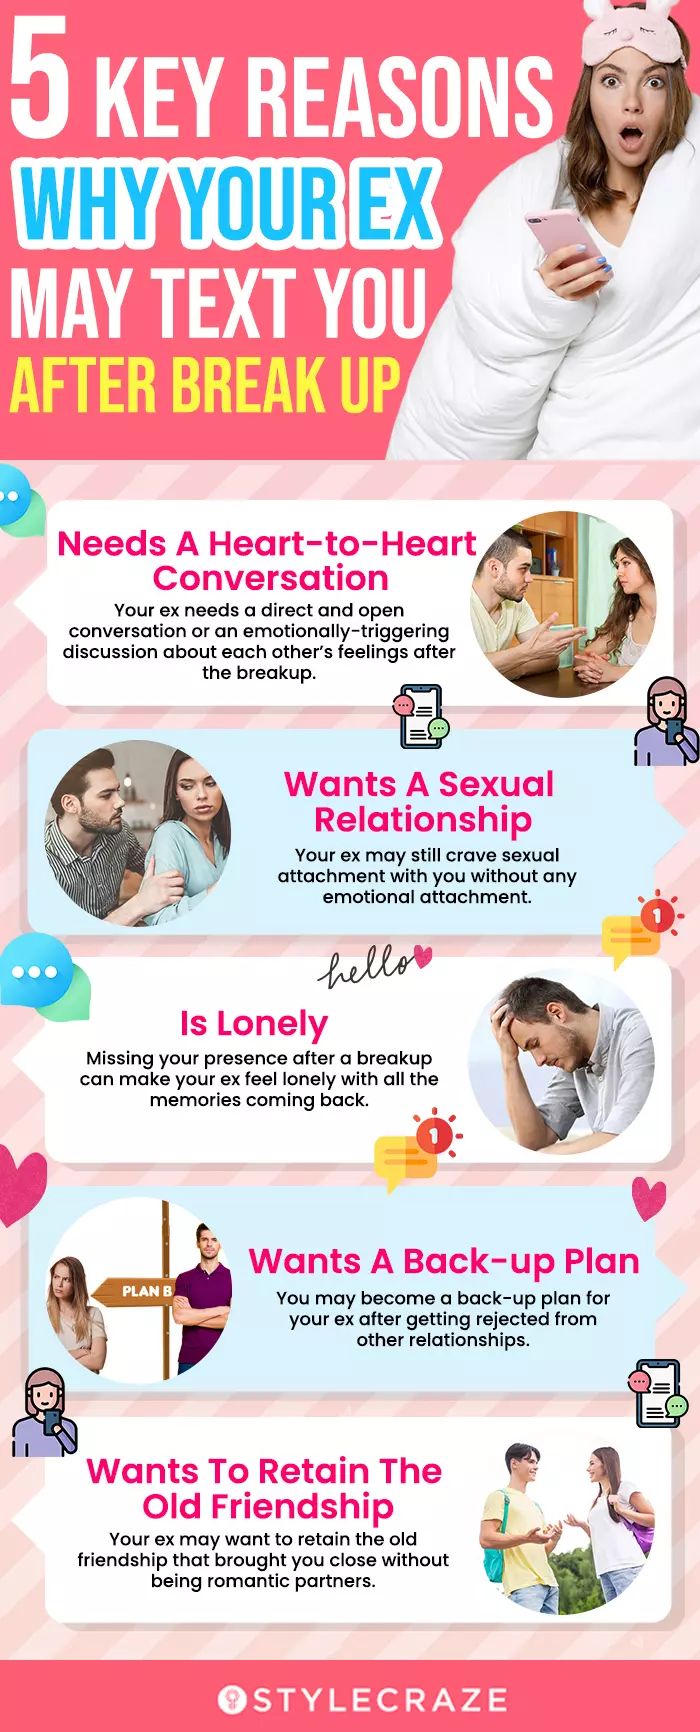 5 key reasons why your ex may text you after break up (infographic)